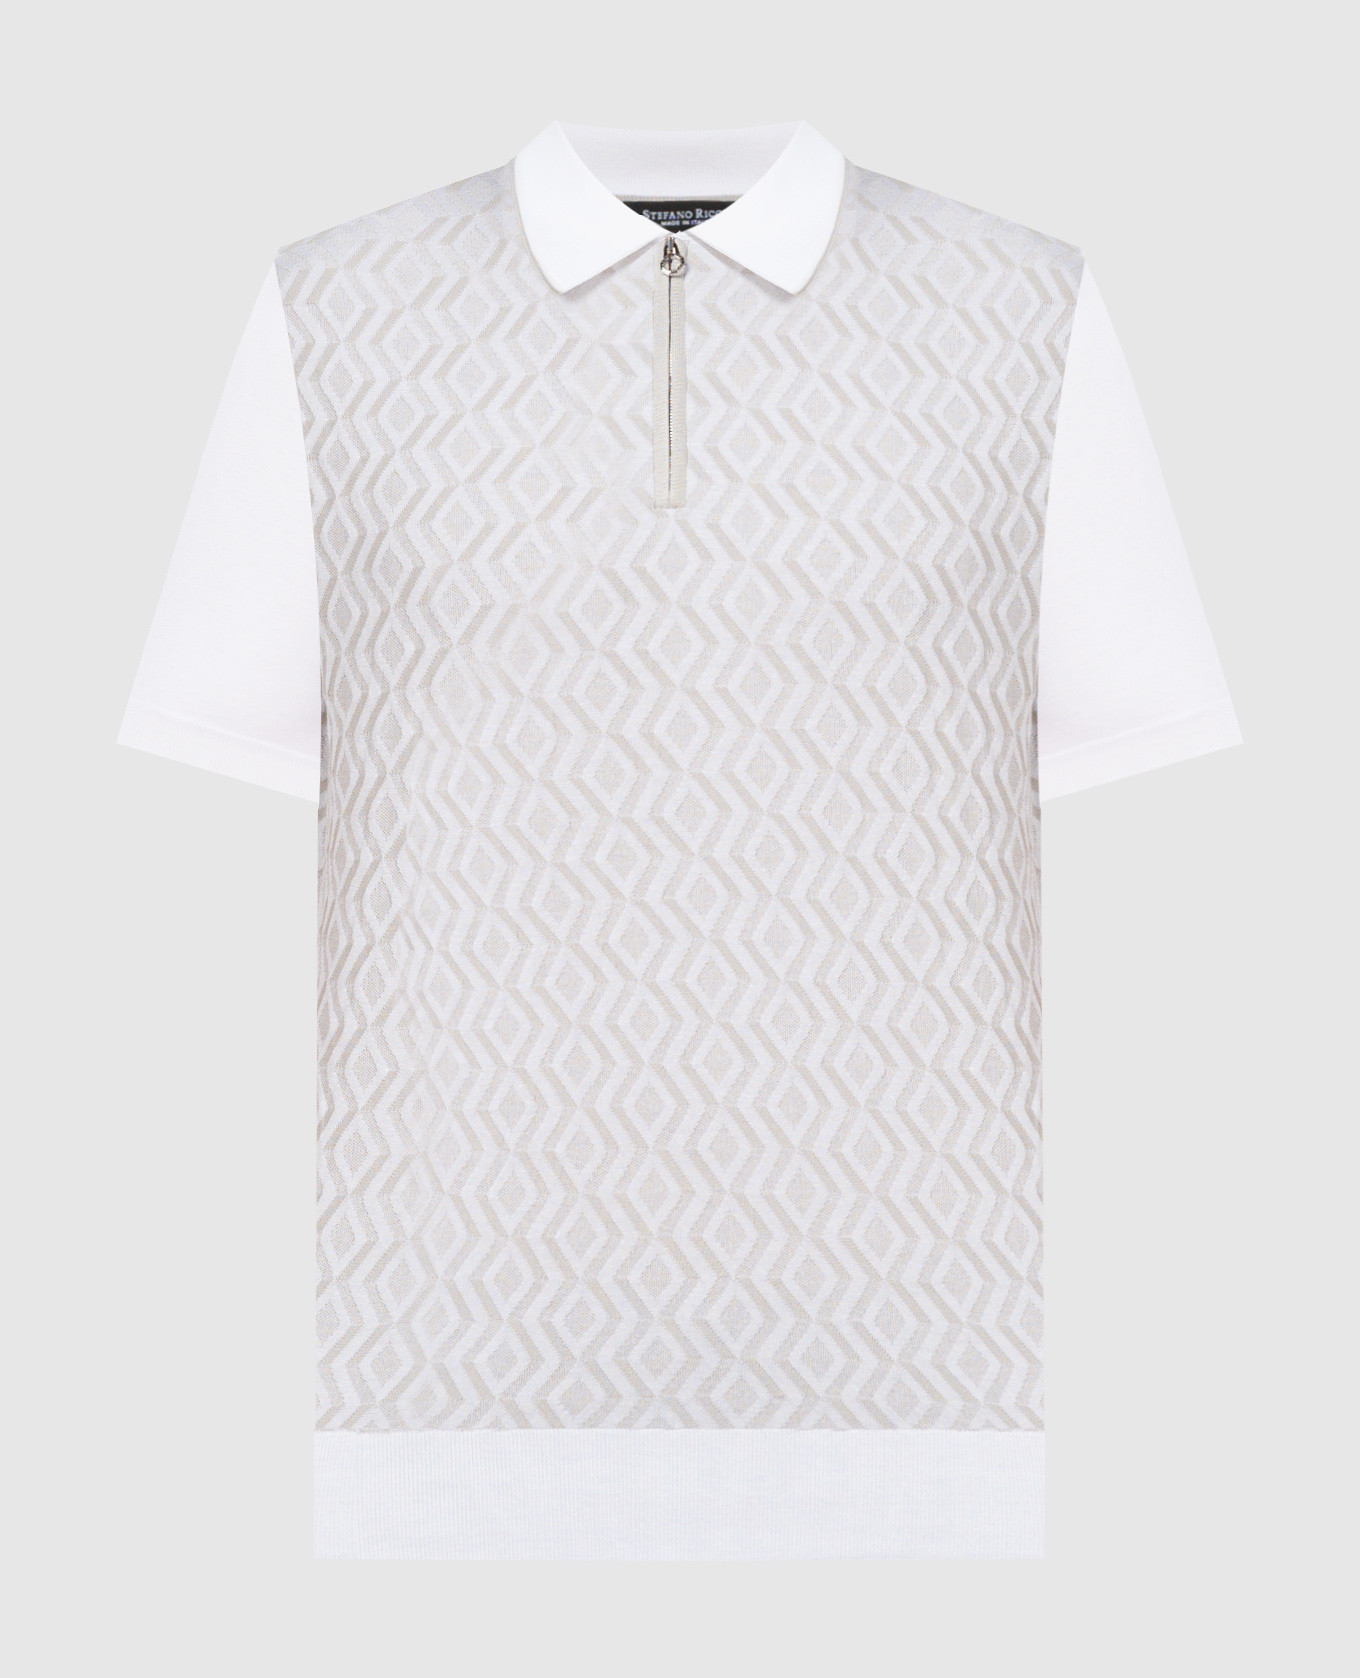 White polo shirt with patterned silk